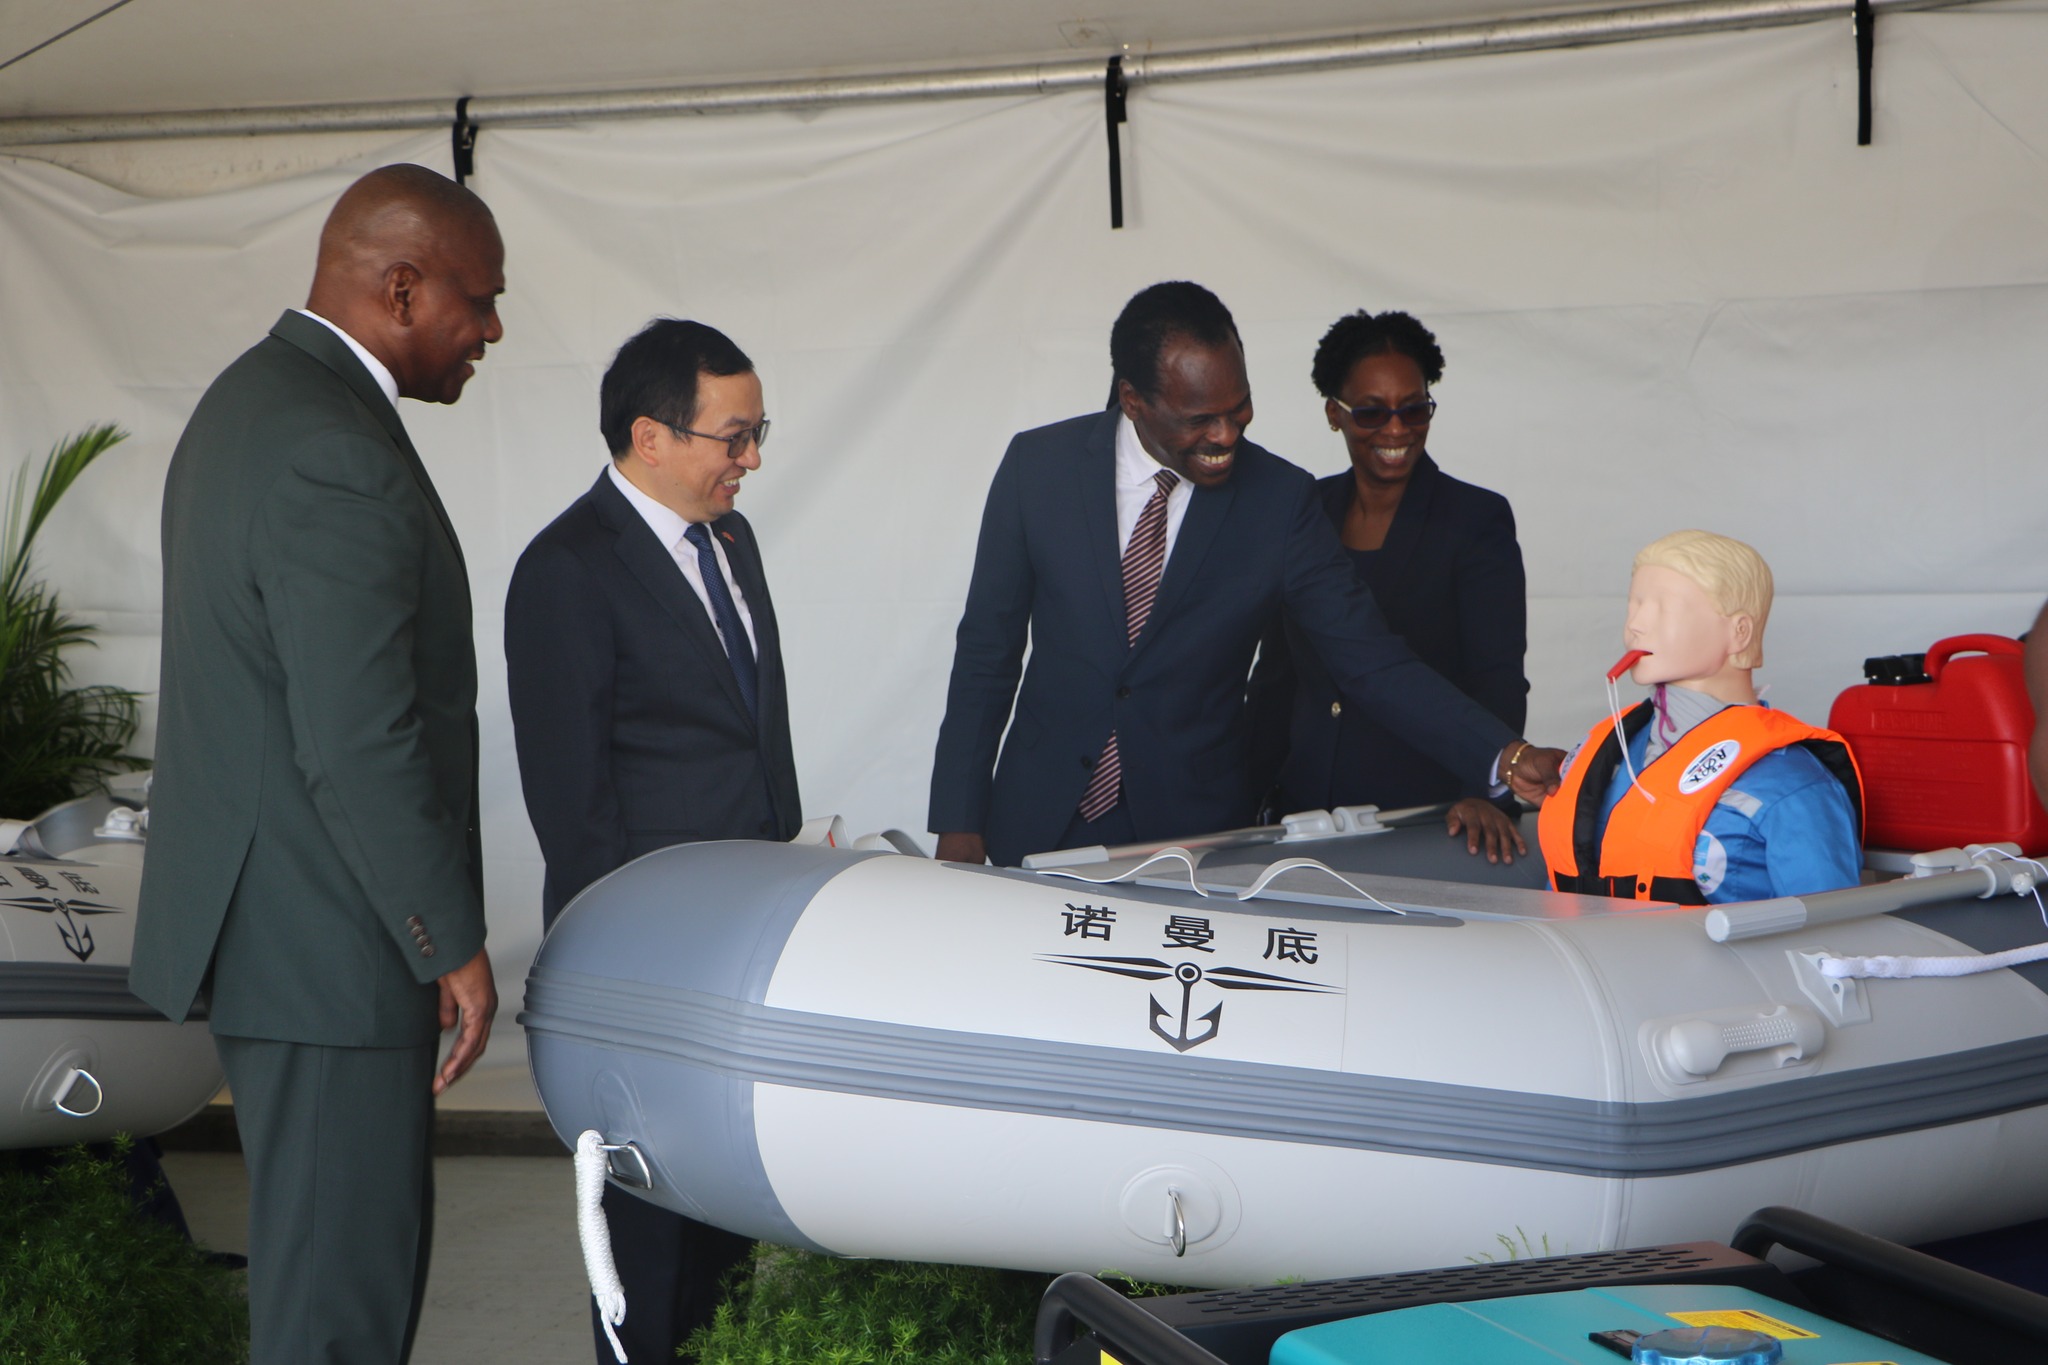 T&T received Disaster Response Equipment from China